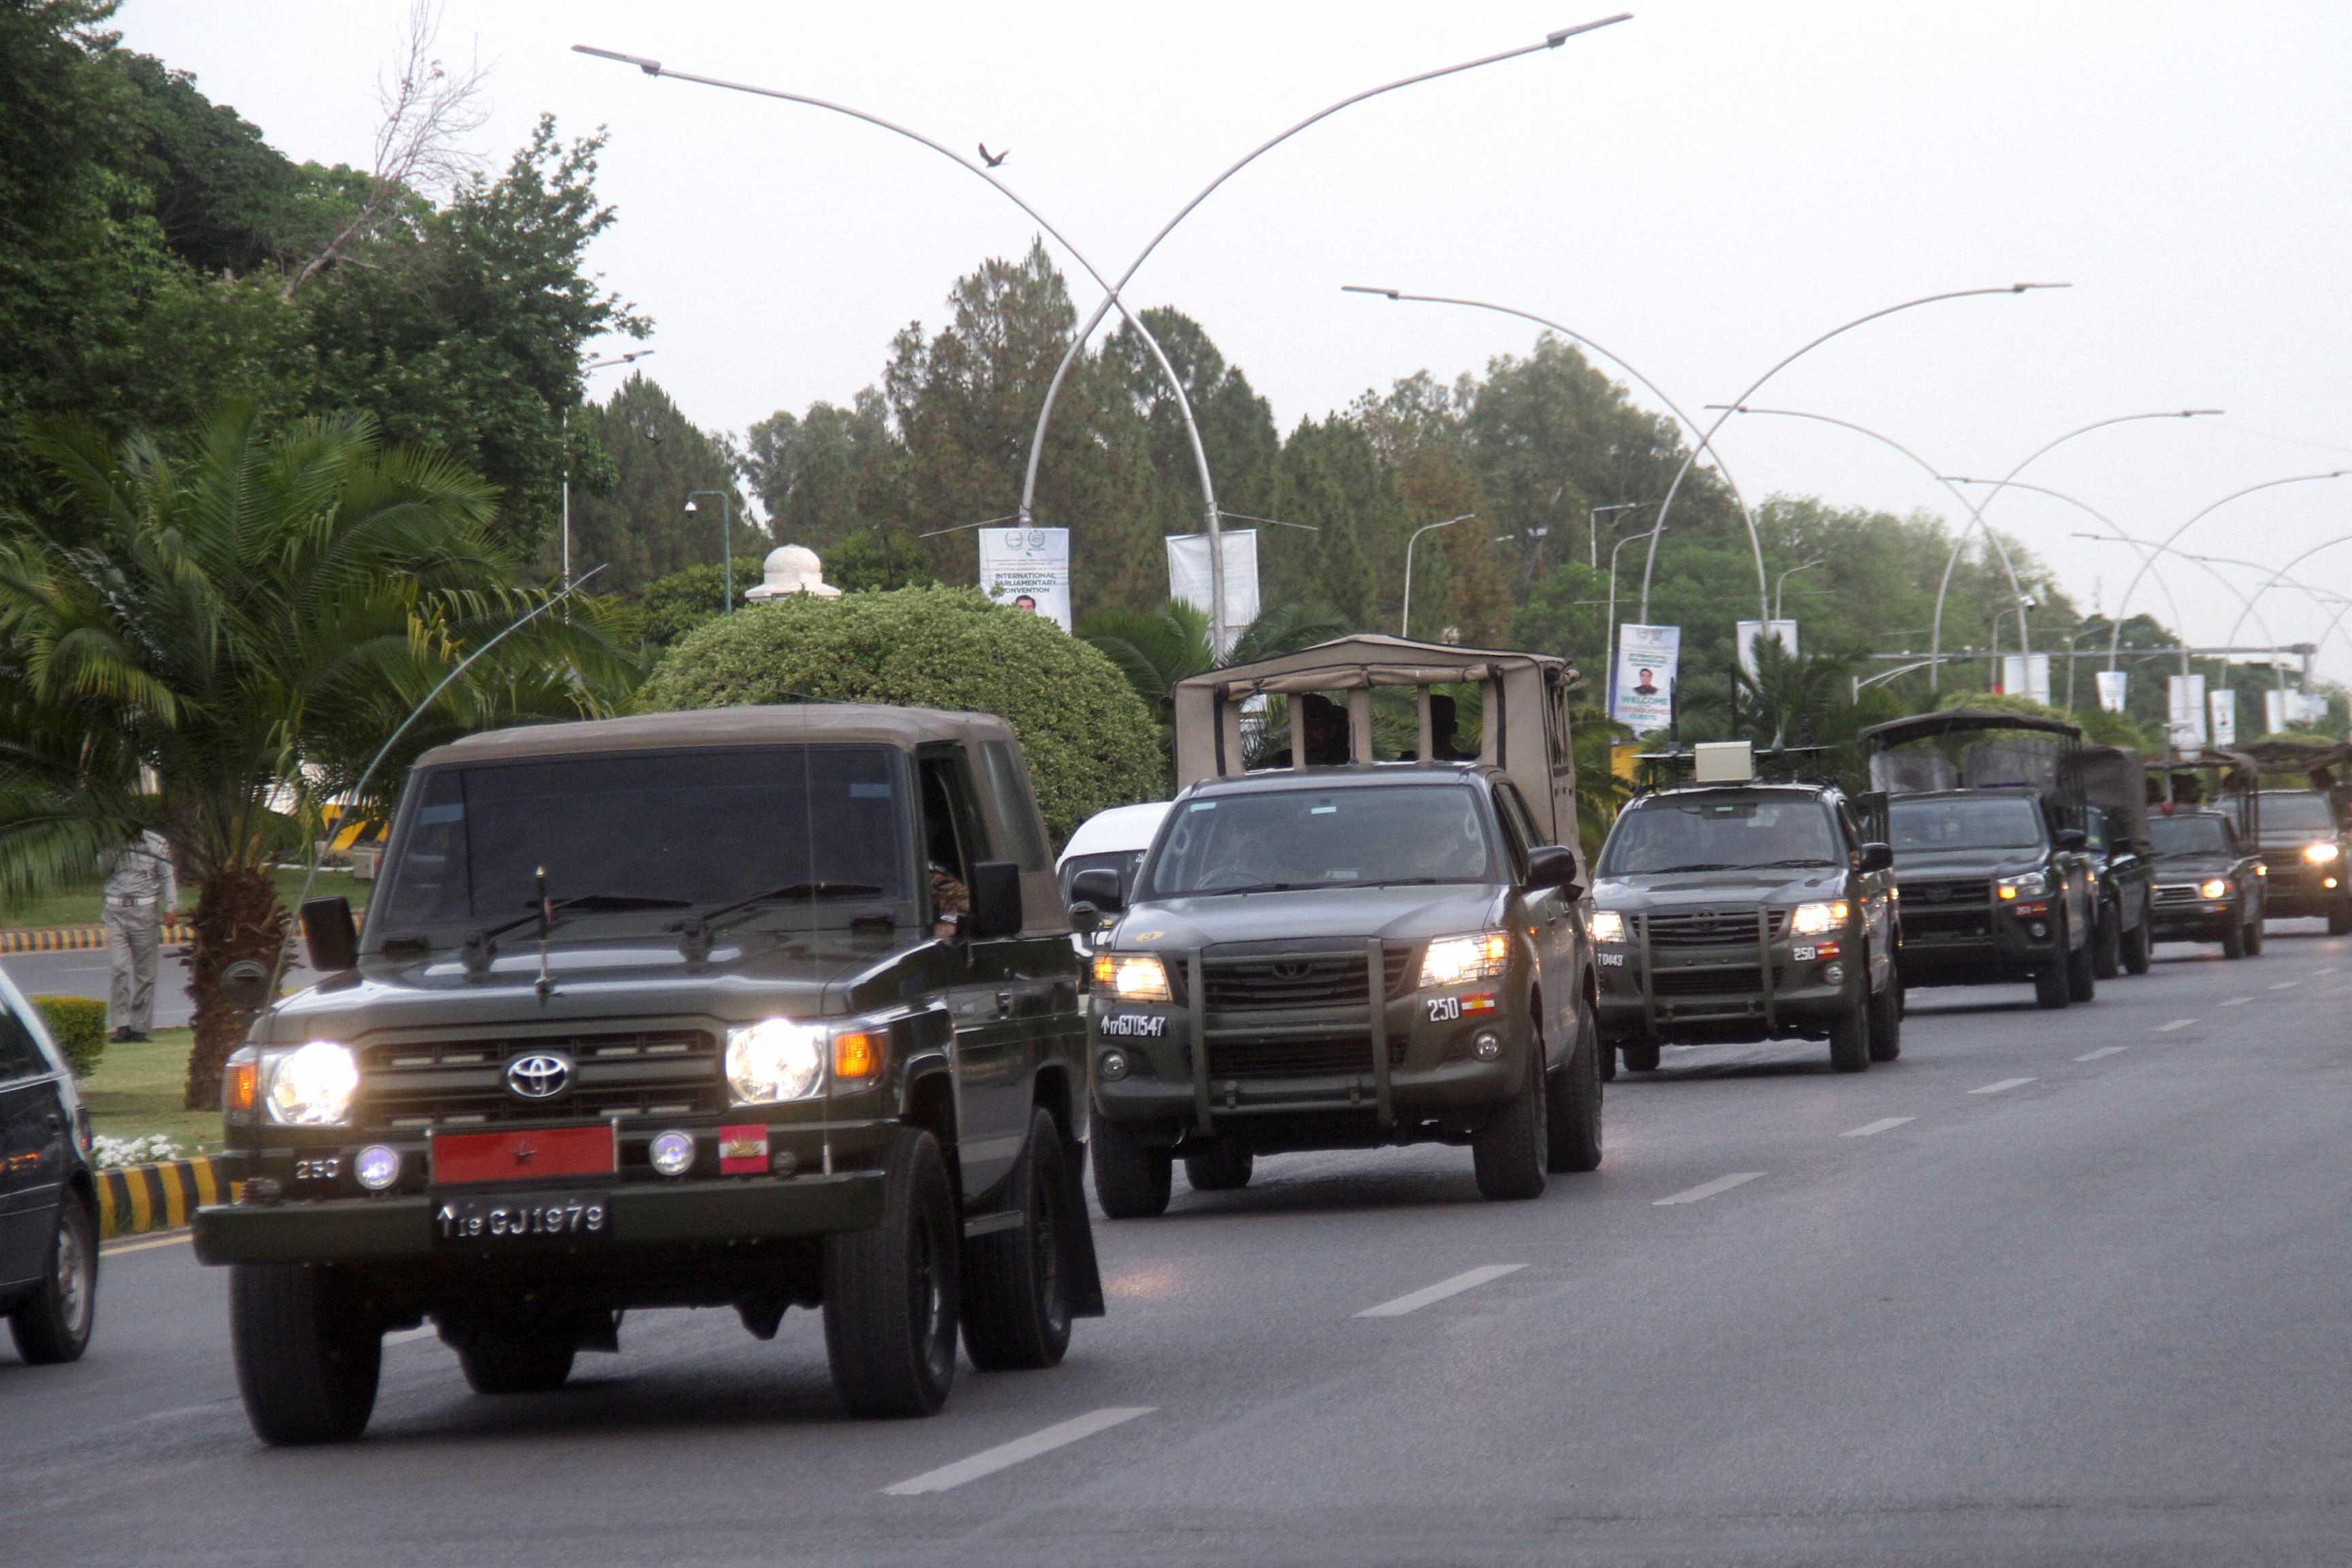 Pakistan Army vehicles patrol during a flag march, ahead of Pakistan's former Prime Minister Imran Khan's appearance in the Supreme Court in Islamabad, Pakistan May 11. Photo: Reuters